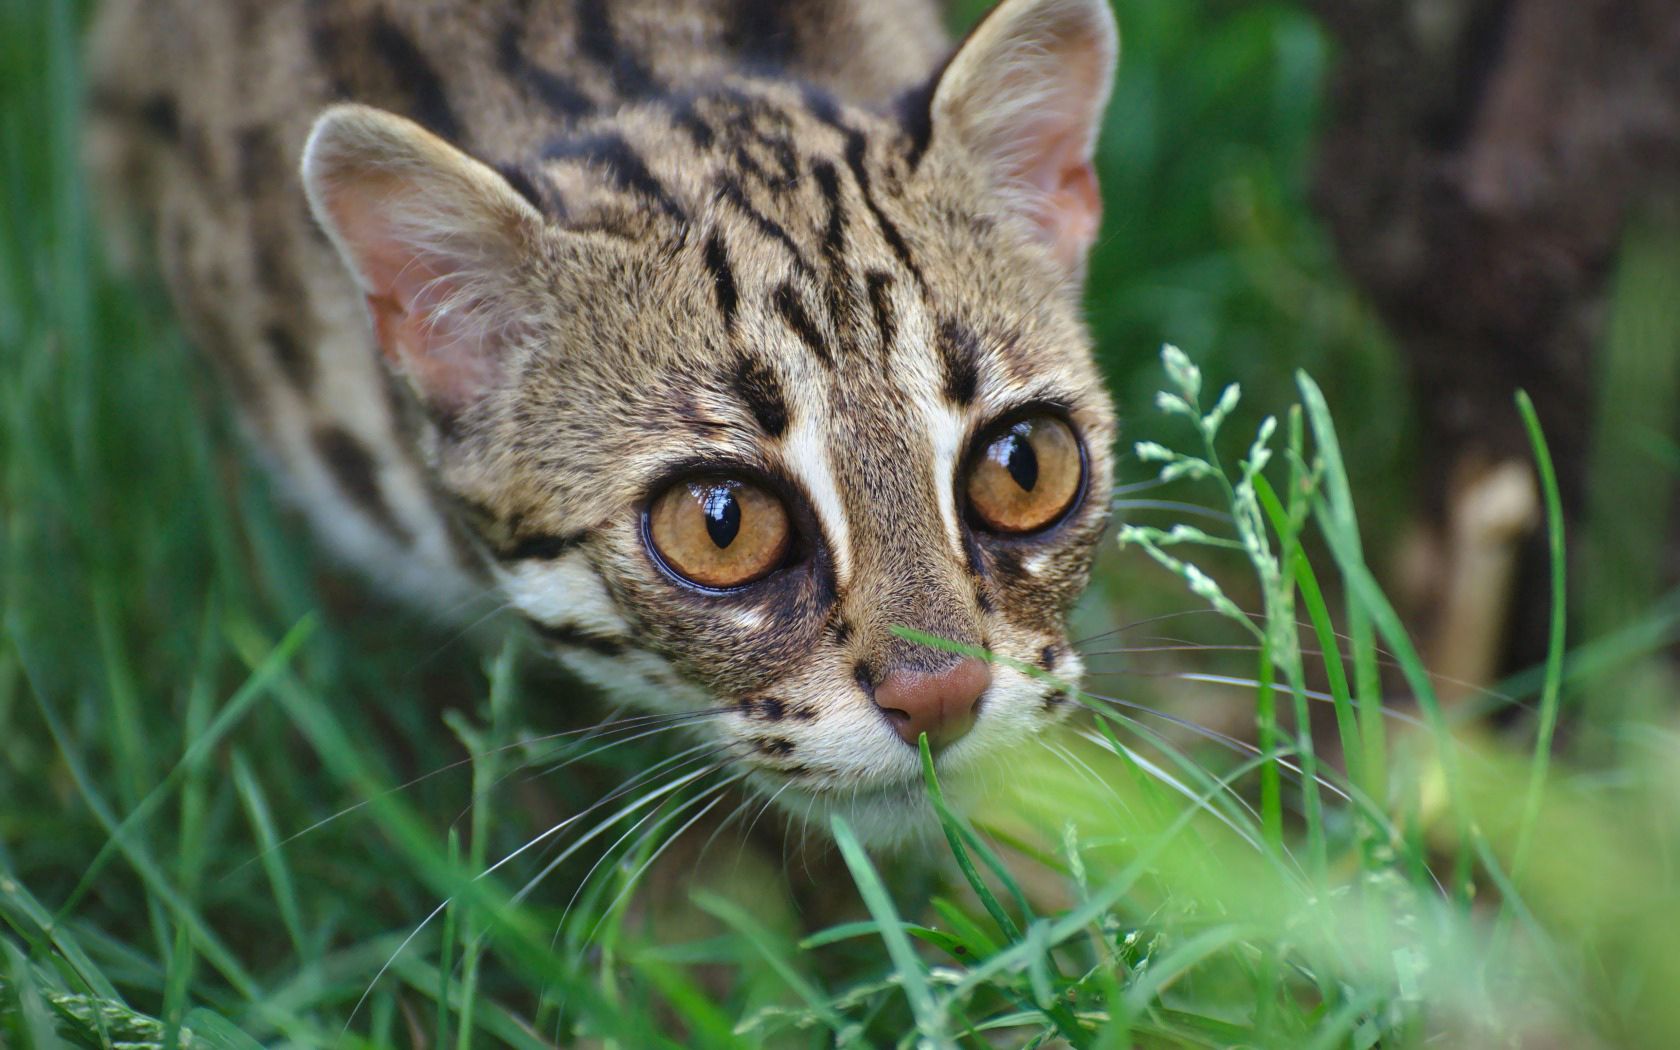 129406 download wallpaper animals, grass, leopard, muzzle, wild cat, wildcat, ocelot screensavers and pictures for free